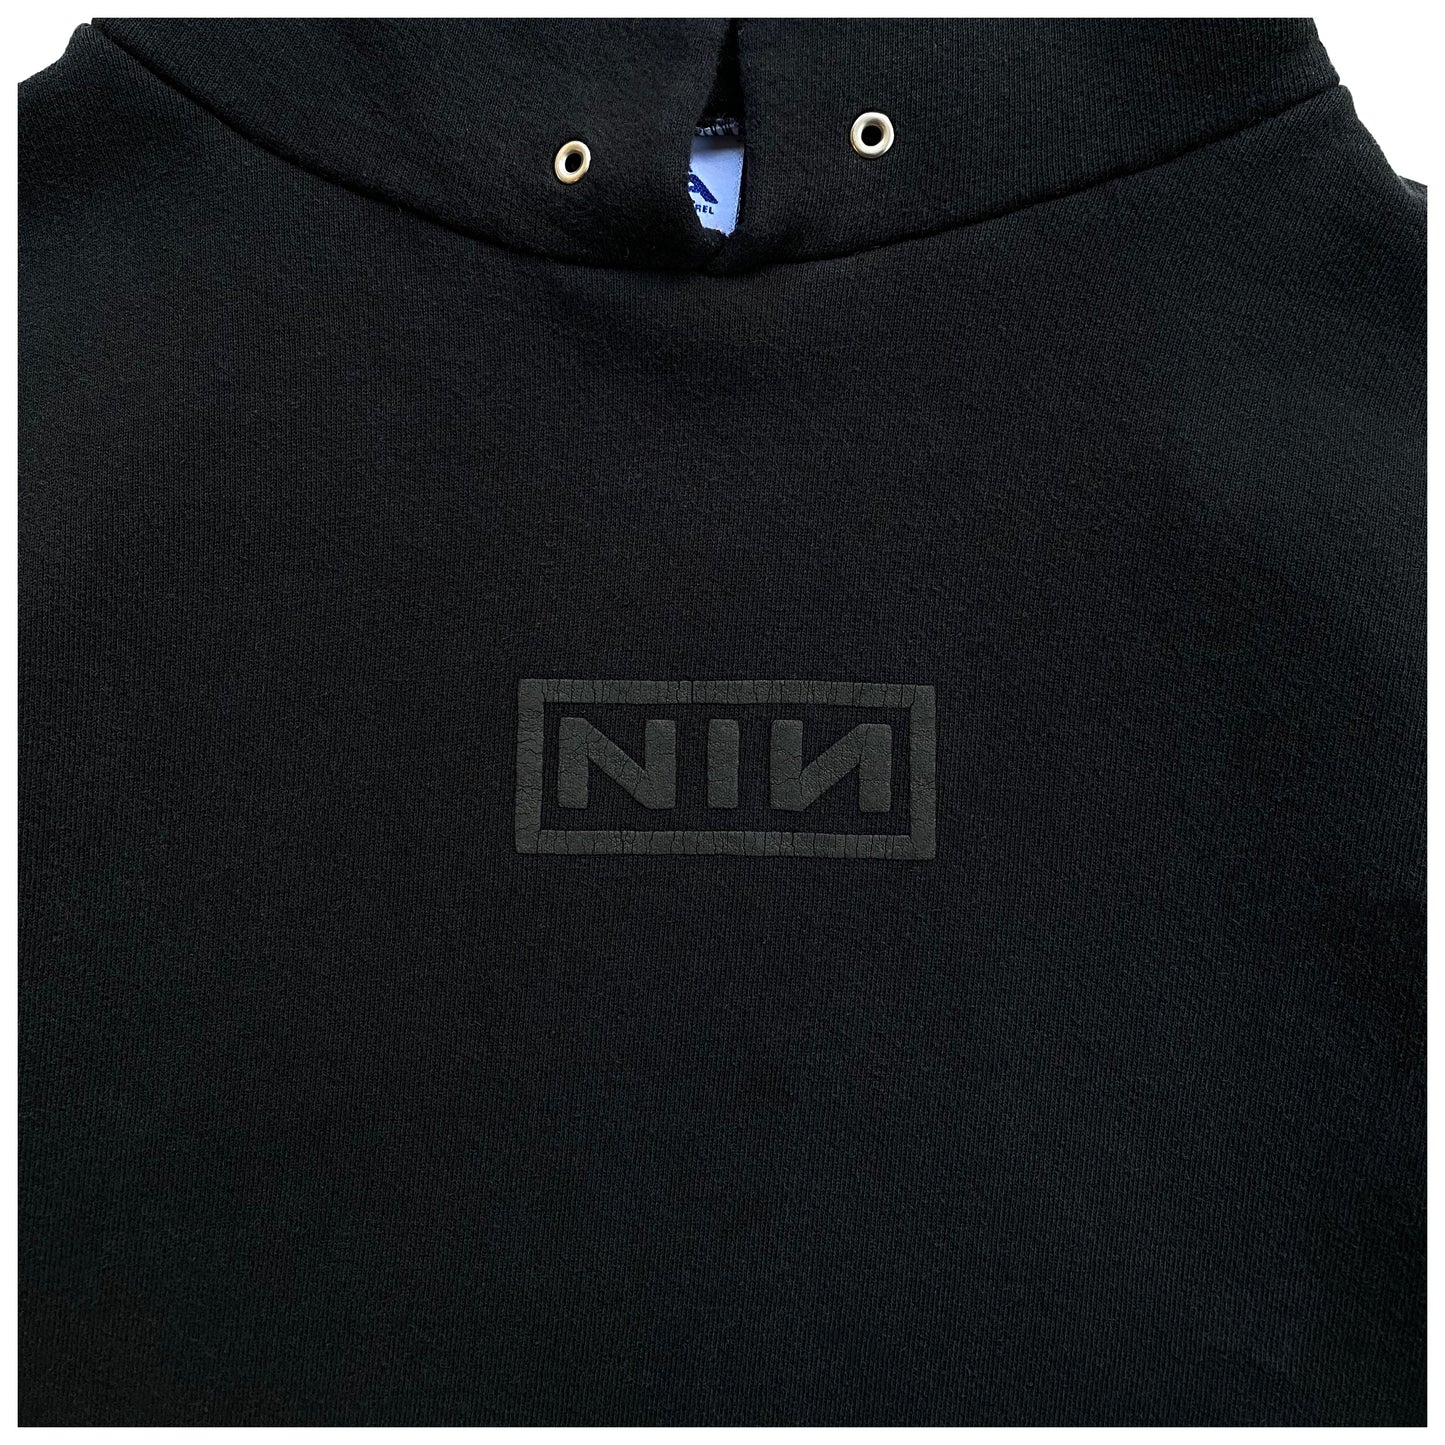 90's NINE INCH NAILS "now i'm nothing" HOODIE